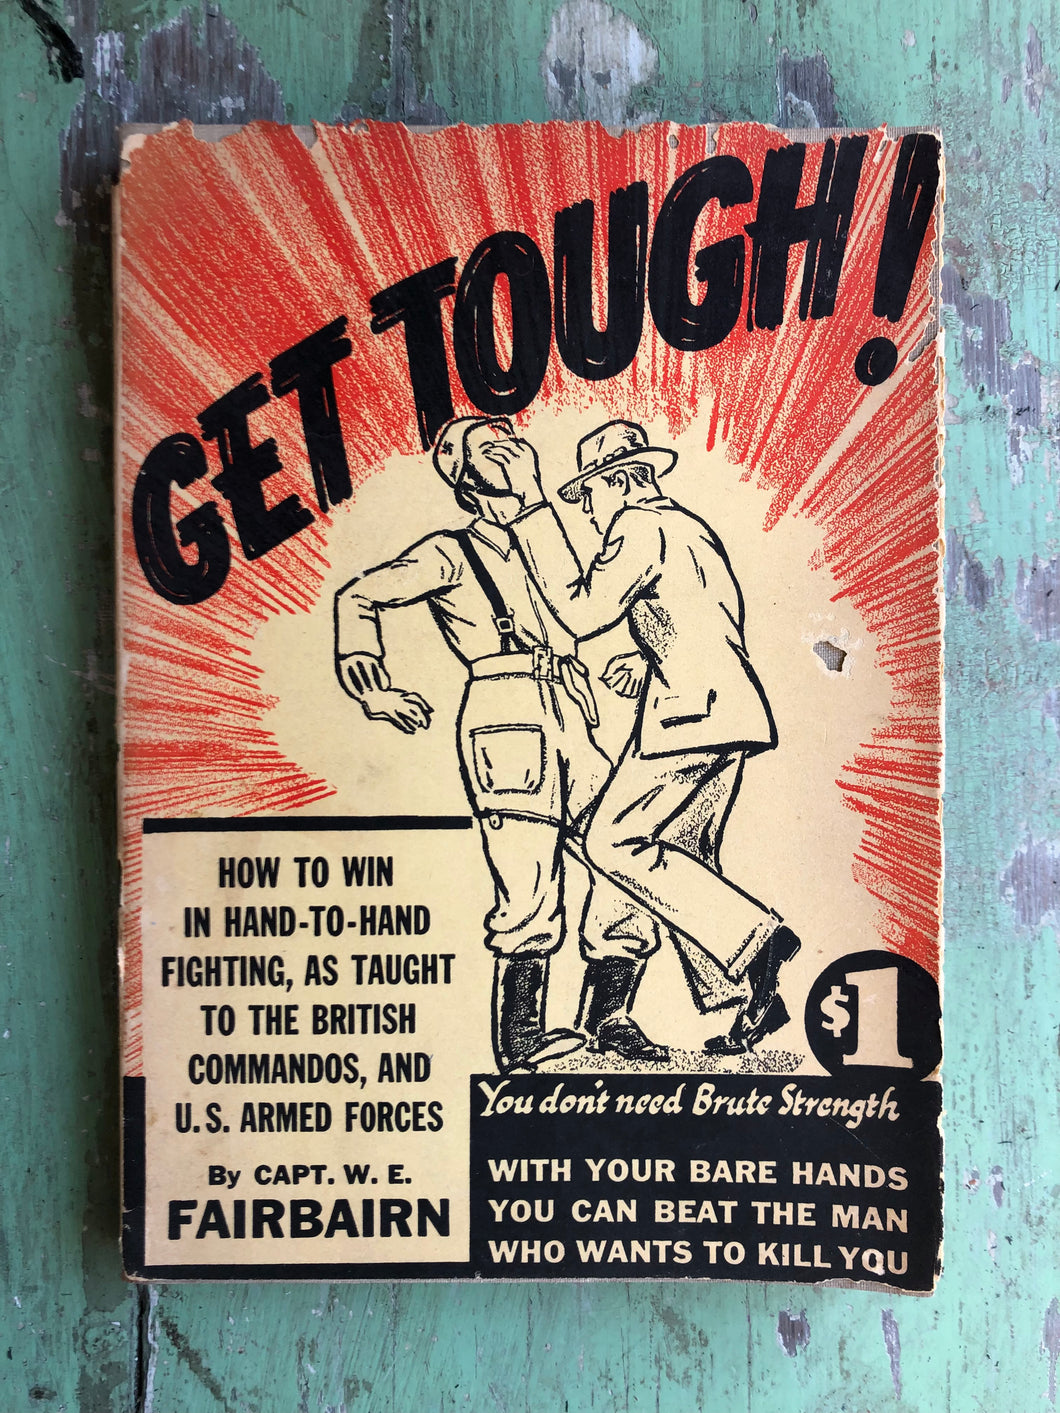 Get Tough! How to Win in Hand-To-Hand Fighting as Taught to the British Commandos and the U. S. Armed Forces By Captain W. E. Fairbairn